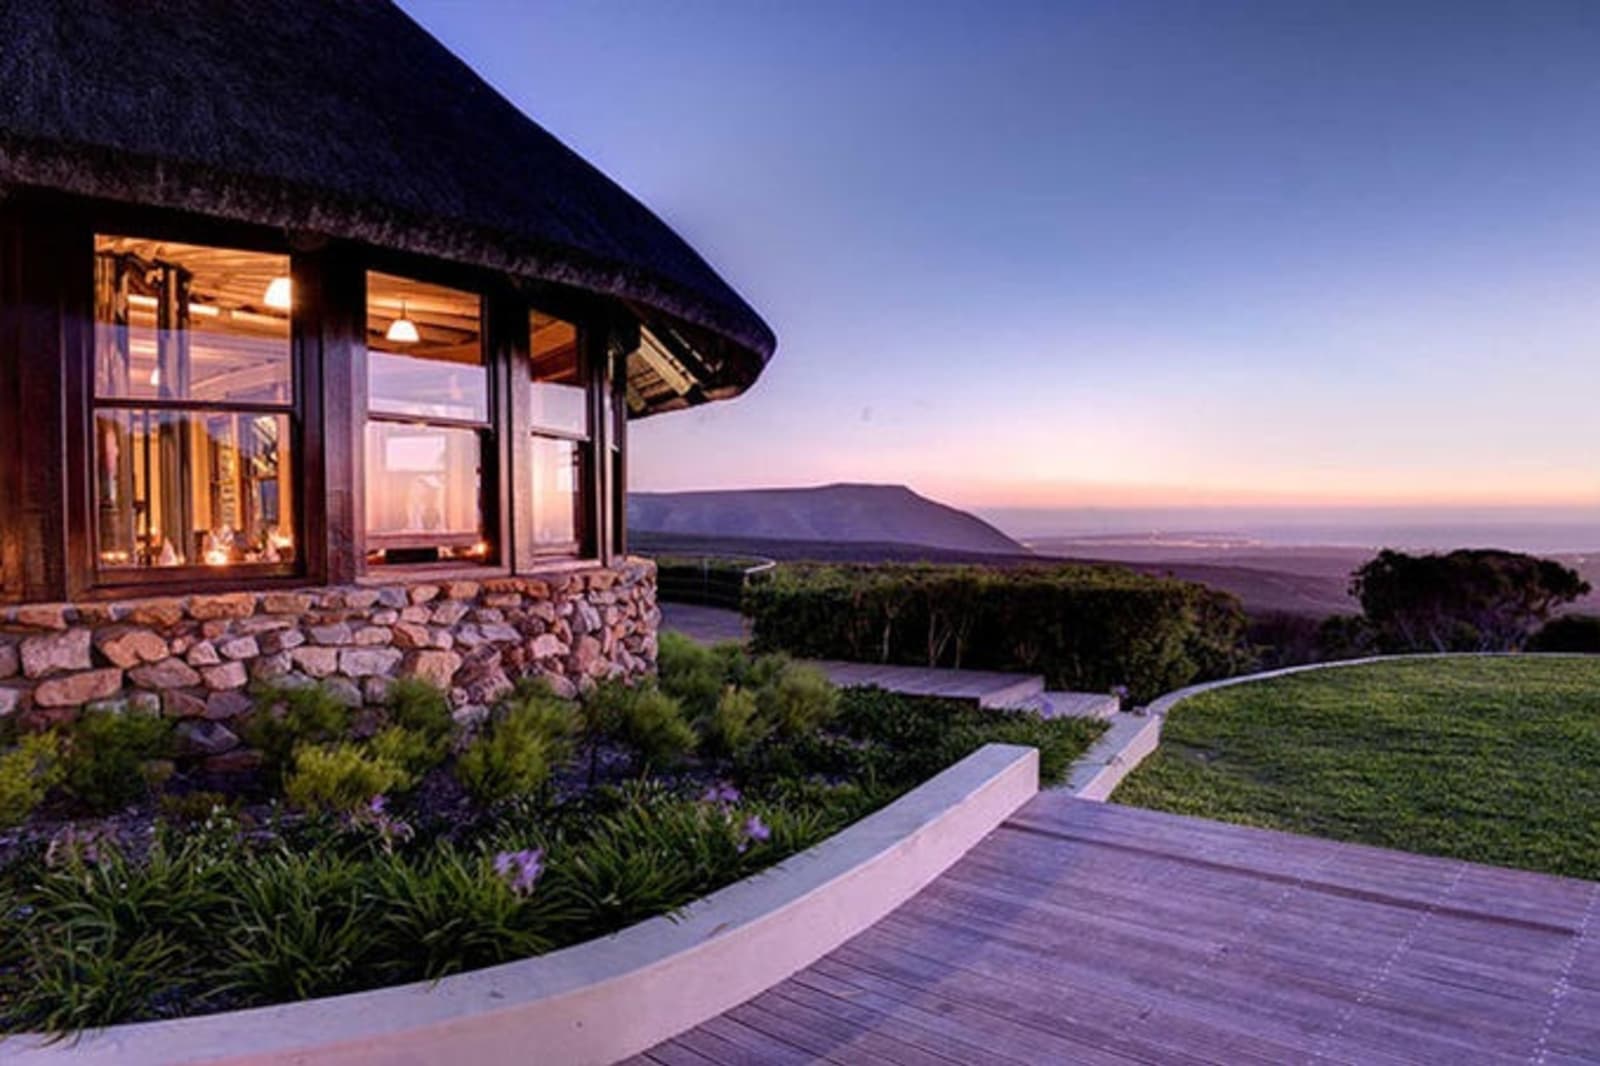 rs-grootbos-south-africa-garden-lodge-exterior.adapt_.945.2.jpg